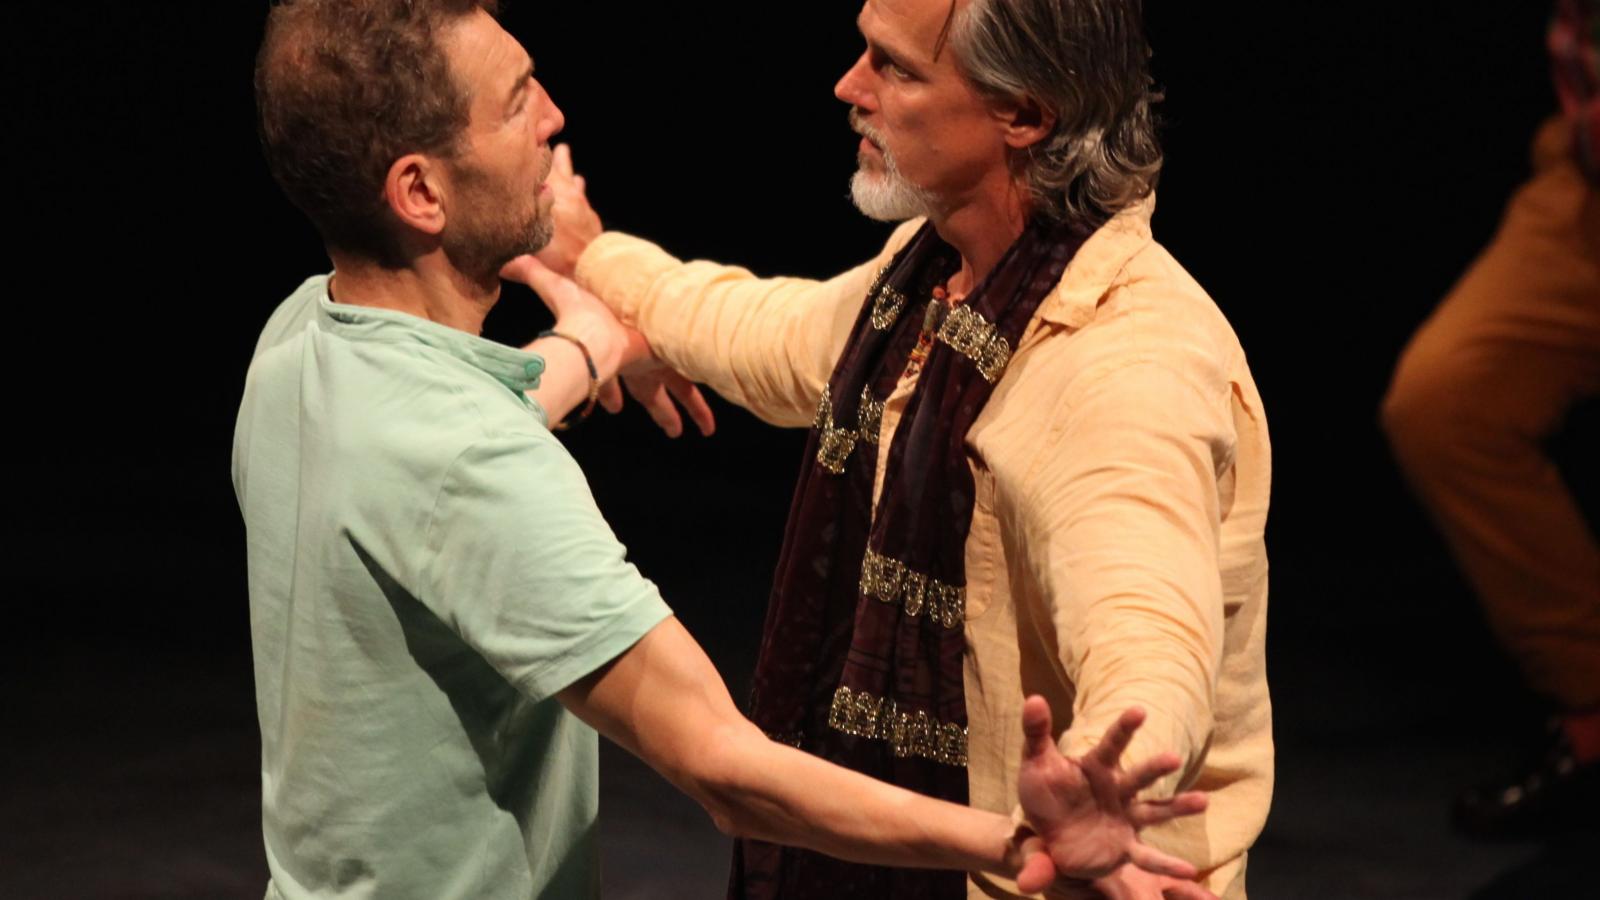 The final encounter between Caliban (Greg Hicks) and Prospero (Kevin McClatchy)